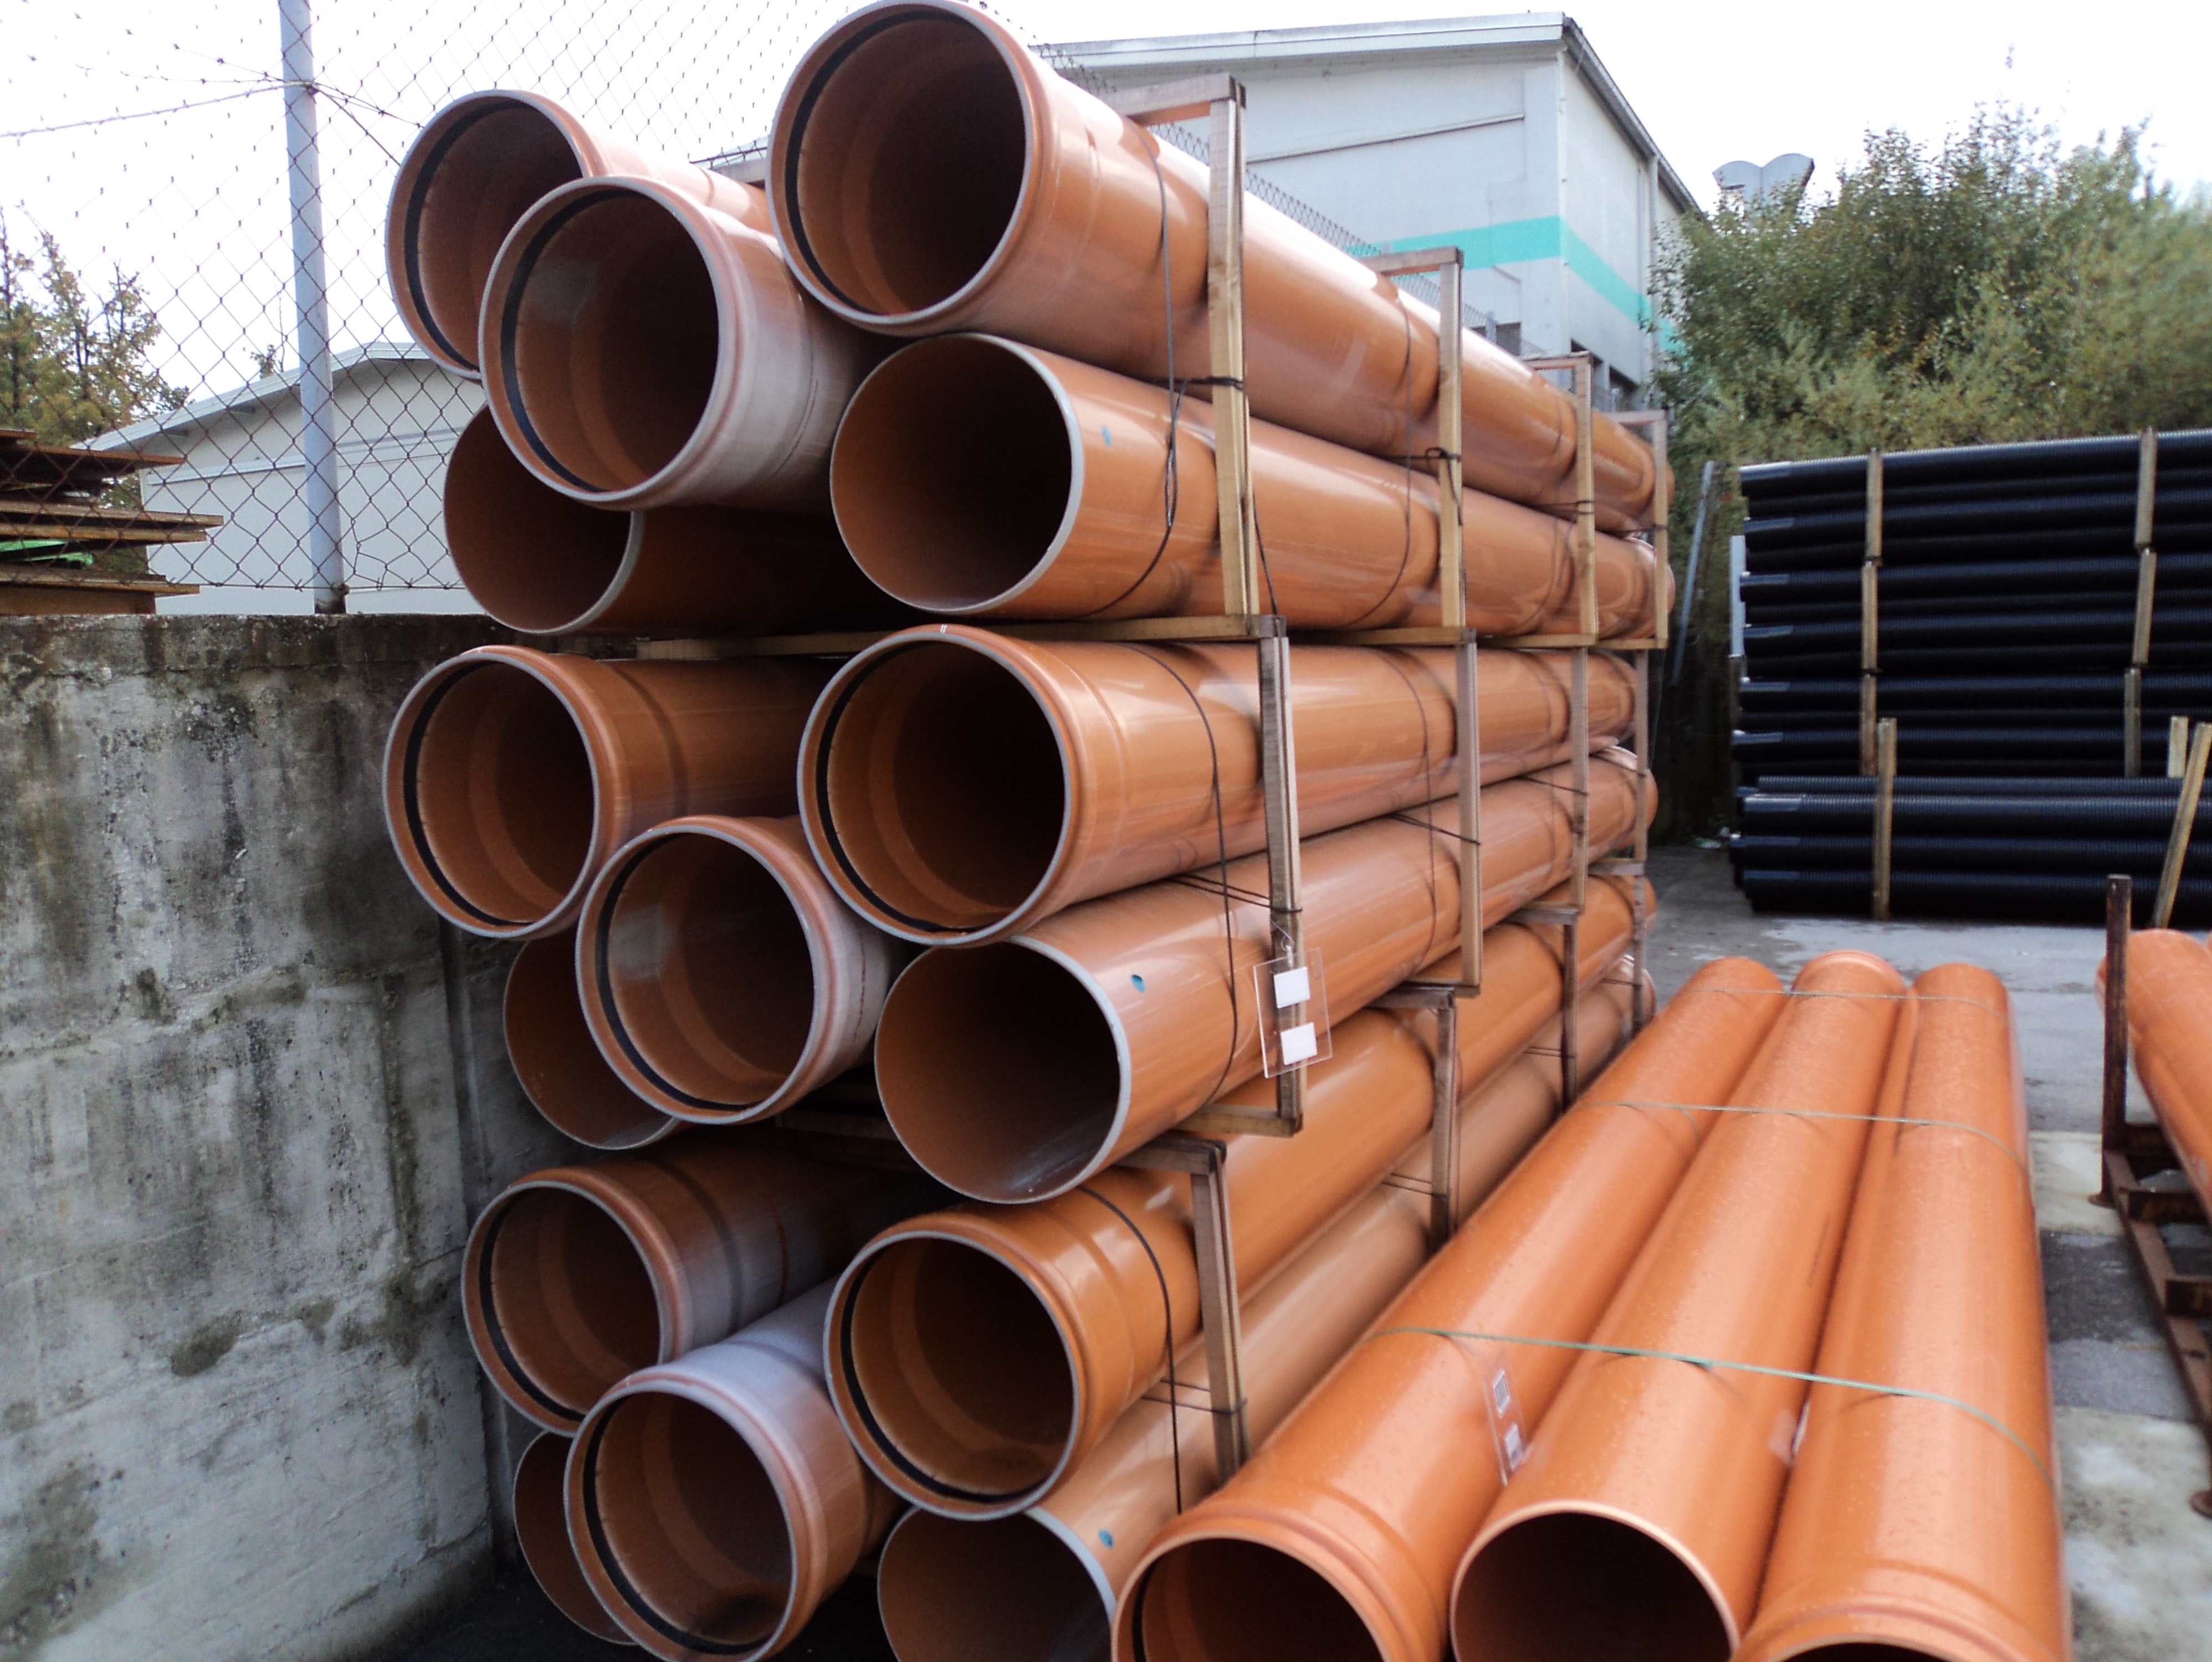 A stack of reddish plastic pipes.